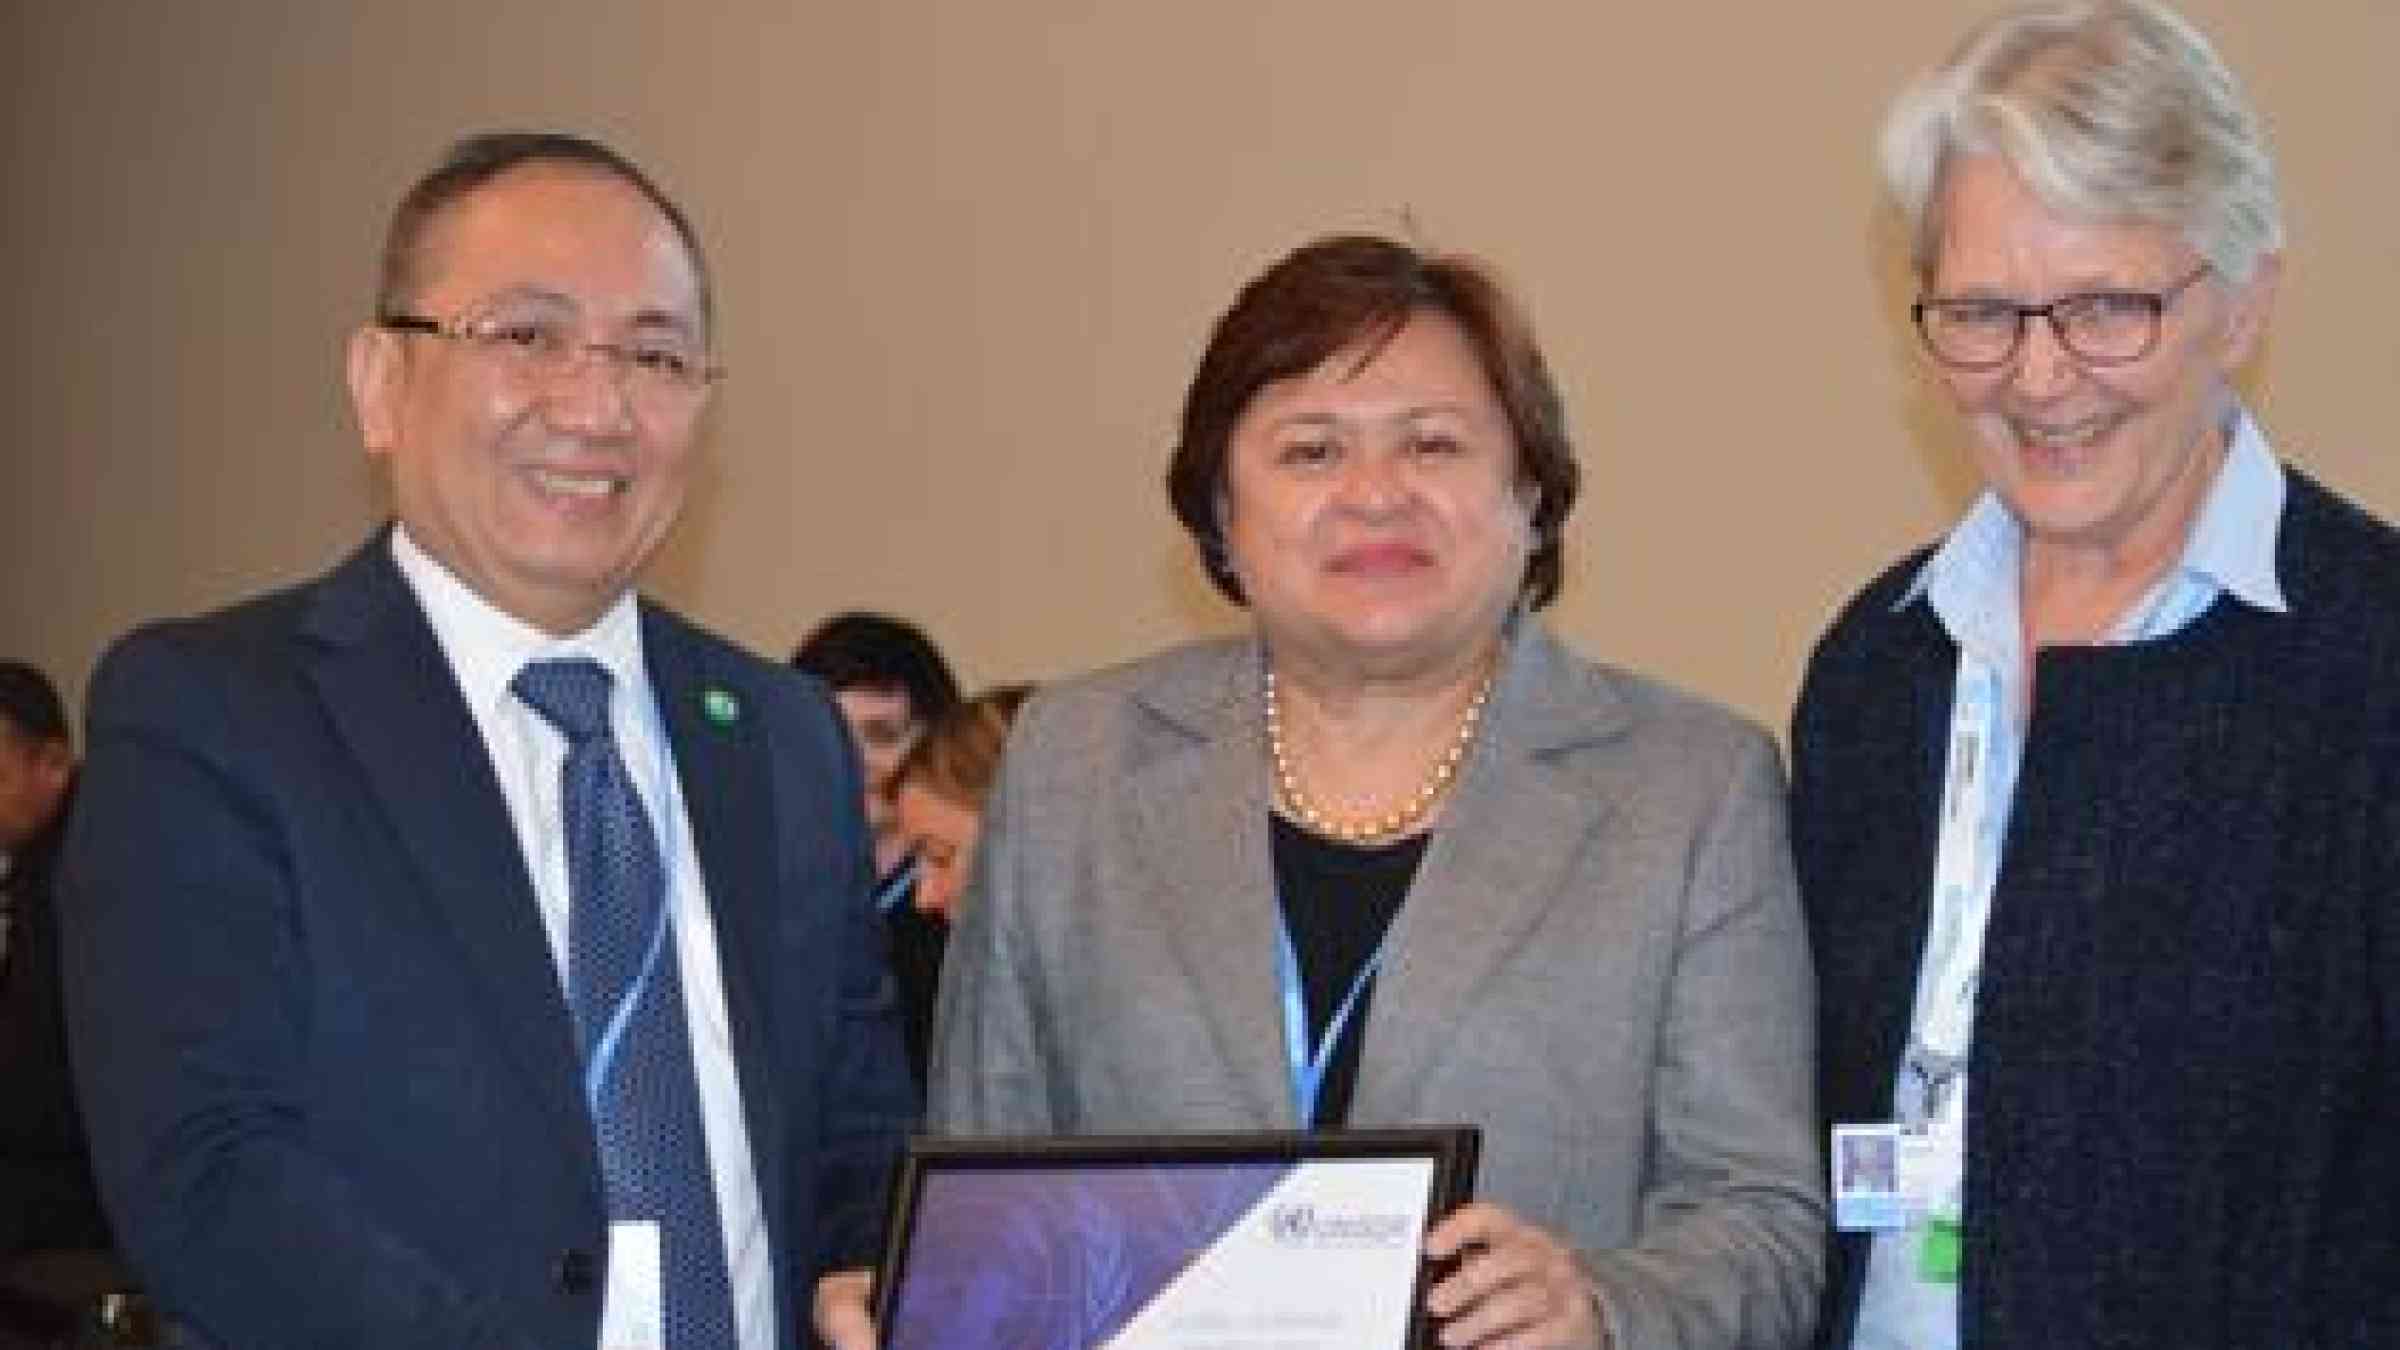 The certificate of Senator Loren Legarda's appointment as Global Champion for Resilience was received from the Head of UNISDR, Margareta Wahlstrom (right) by Ambassador Ma. Theresa Lazaro (center), Philippine Ambassador to France, and Commissioner Emmanuel M. de Guzman (left), Philippines Climate Change Commission, on behalf of Senator Loren Legarda, who was unable to travel to Paris because of her duties as Chair of the Senate Committee on Finance. (Photo: UNISDR)